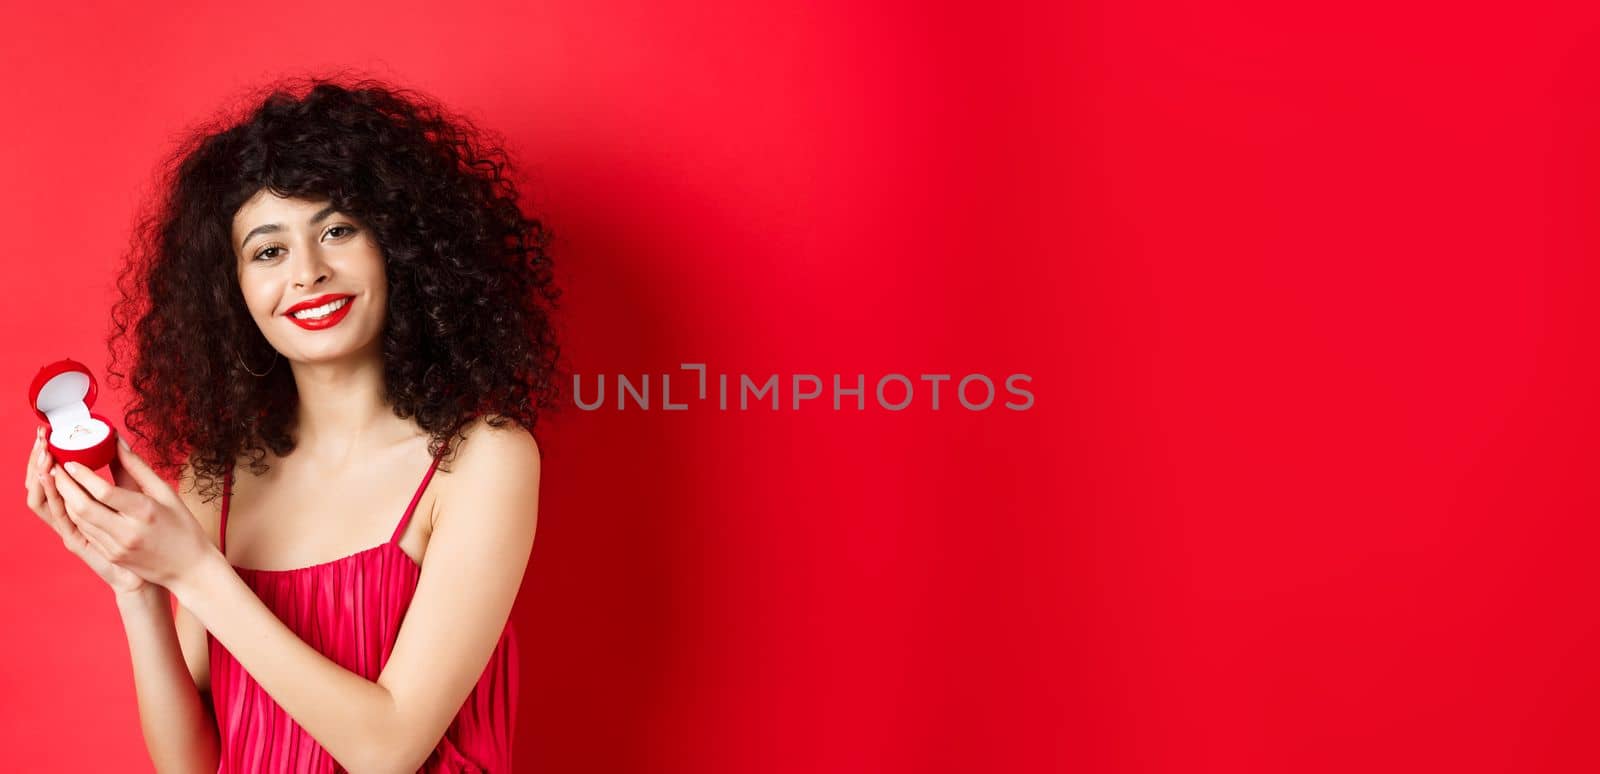 Romantic woman with curly hair, wearing red dress and showing engagement ring, standing happy on studio background.